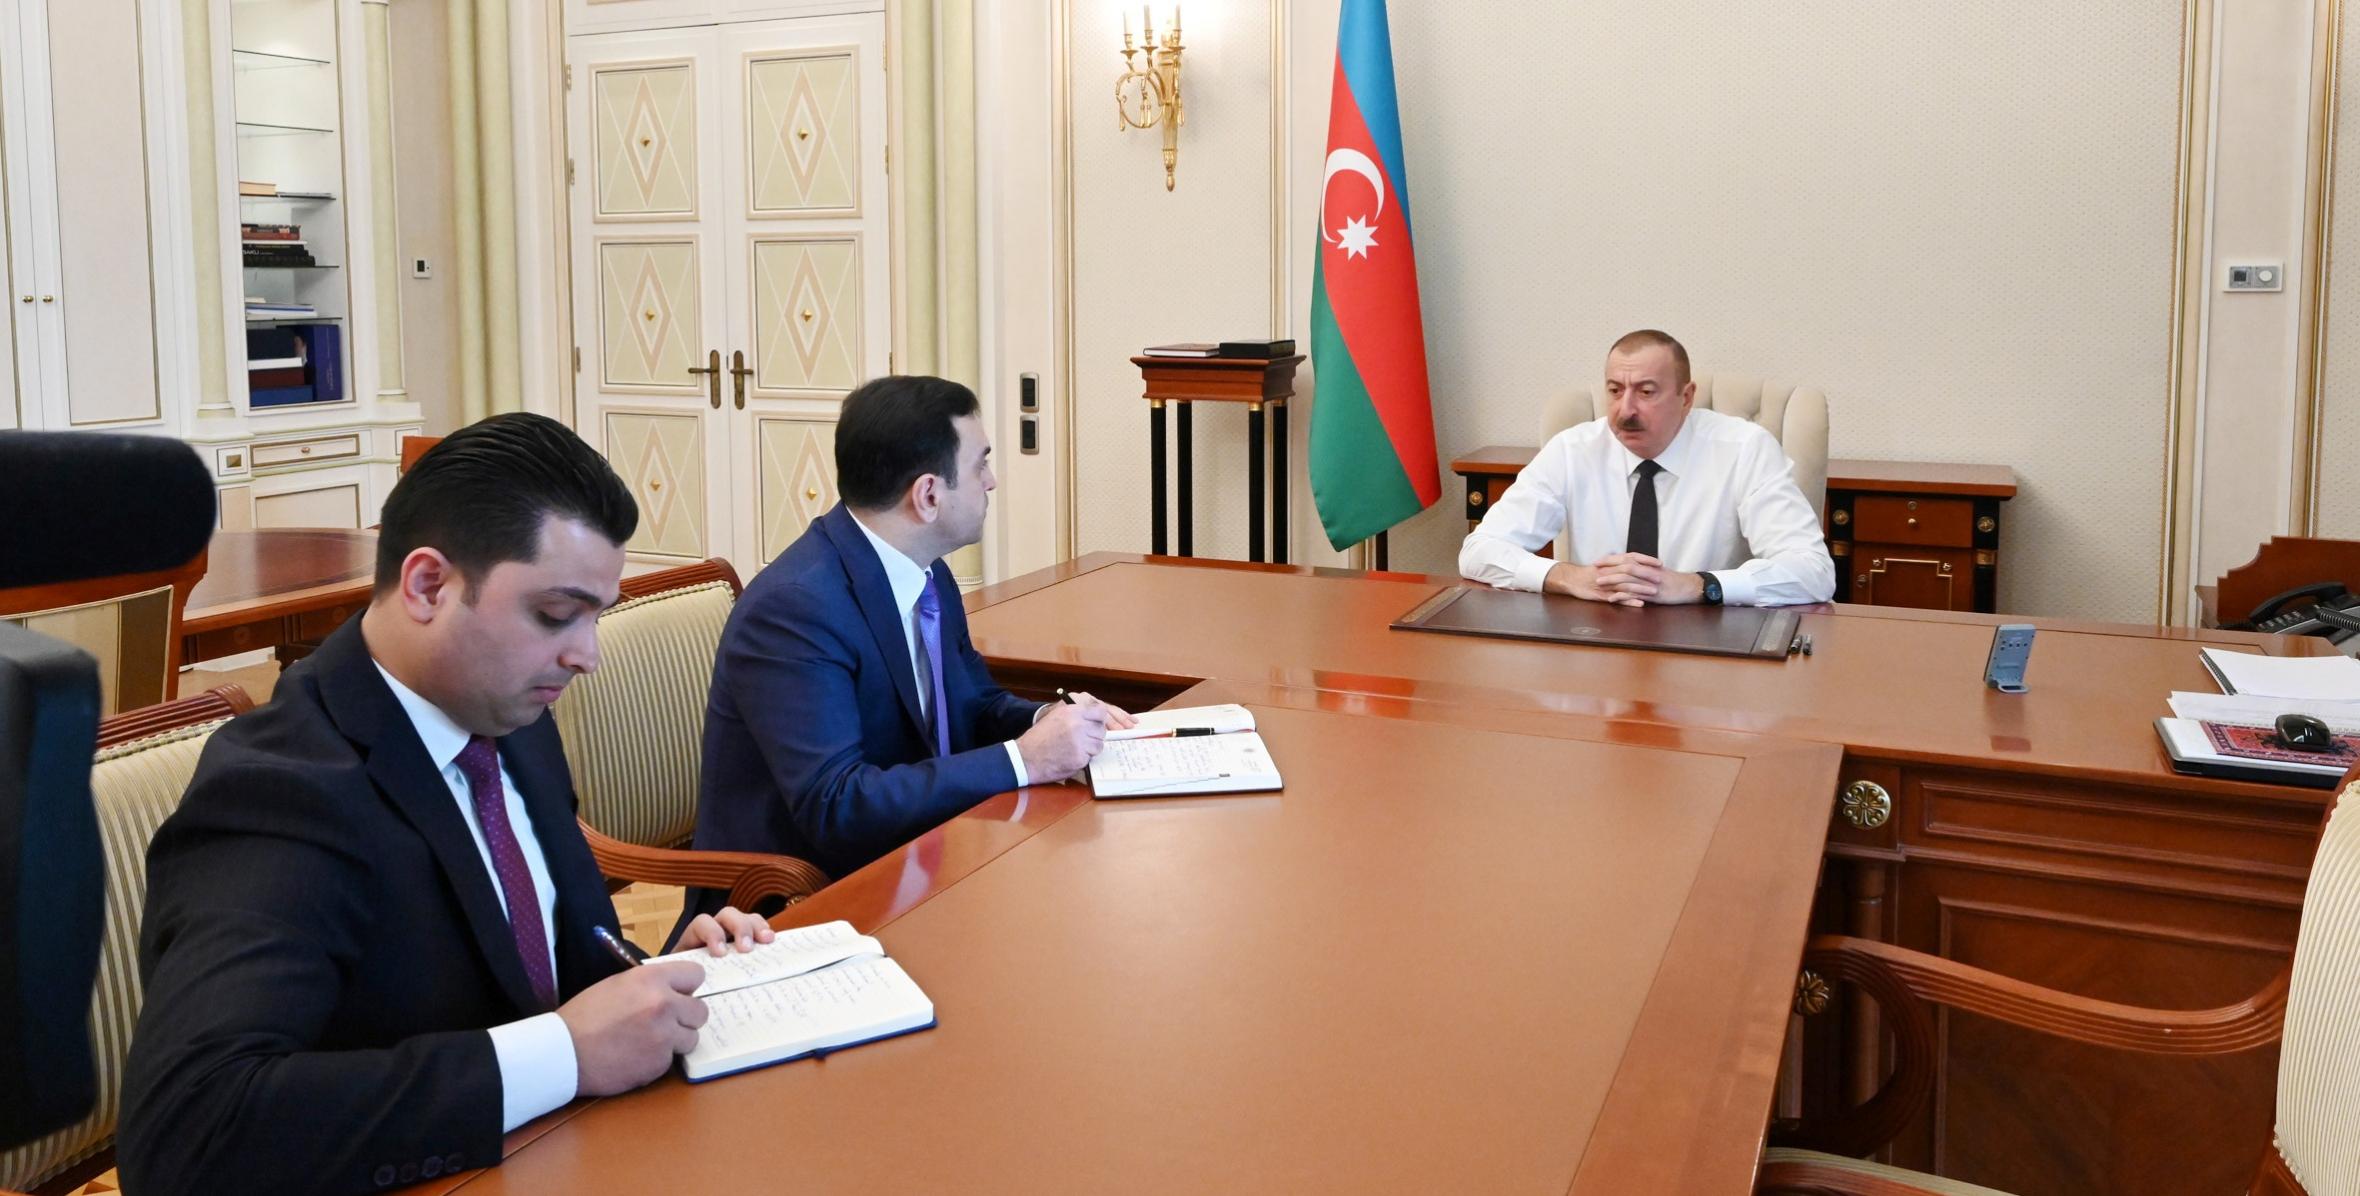 Ilham Aliyev received Nahid Baghirov on his appointment as head of Ismayilli District Executive Authority and Mirhasan Seyidov on his appointment as head of Neftchala District Executive Authority